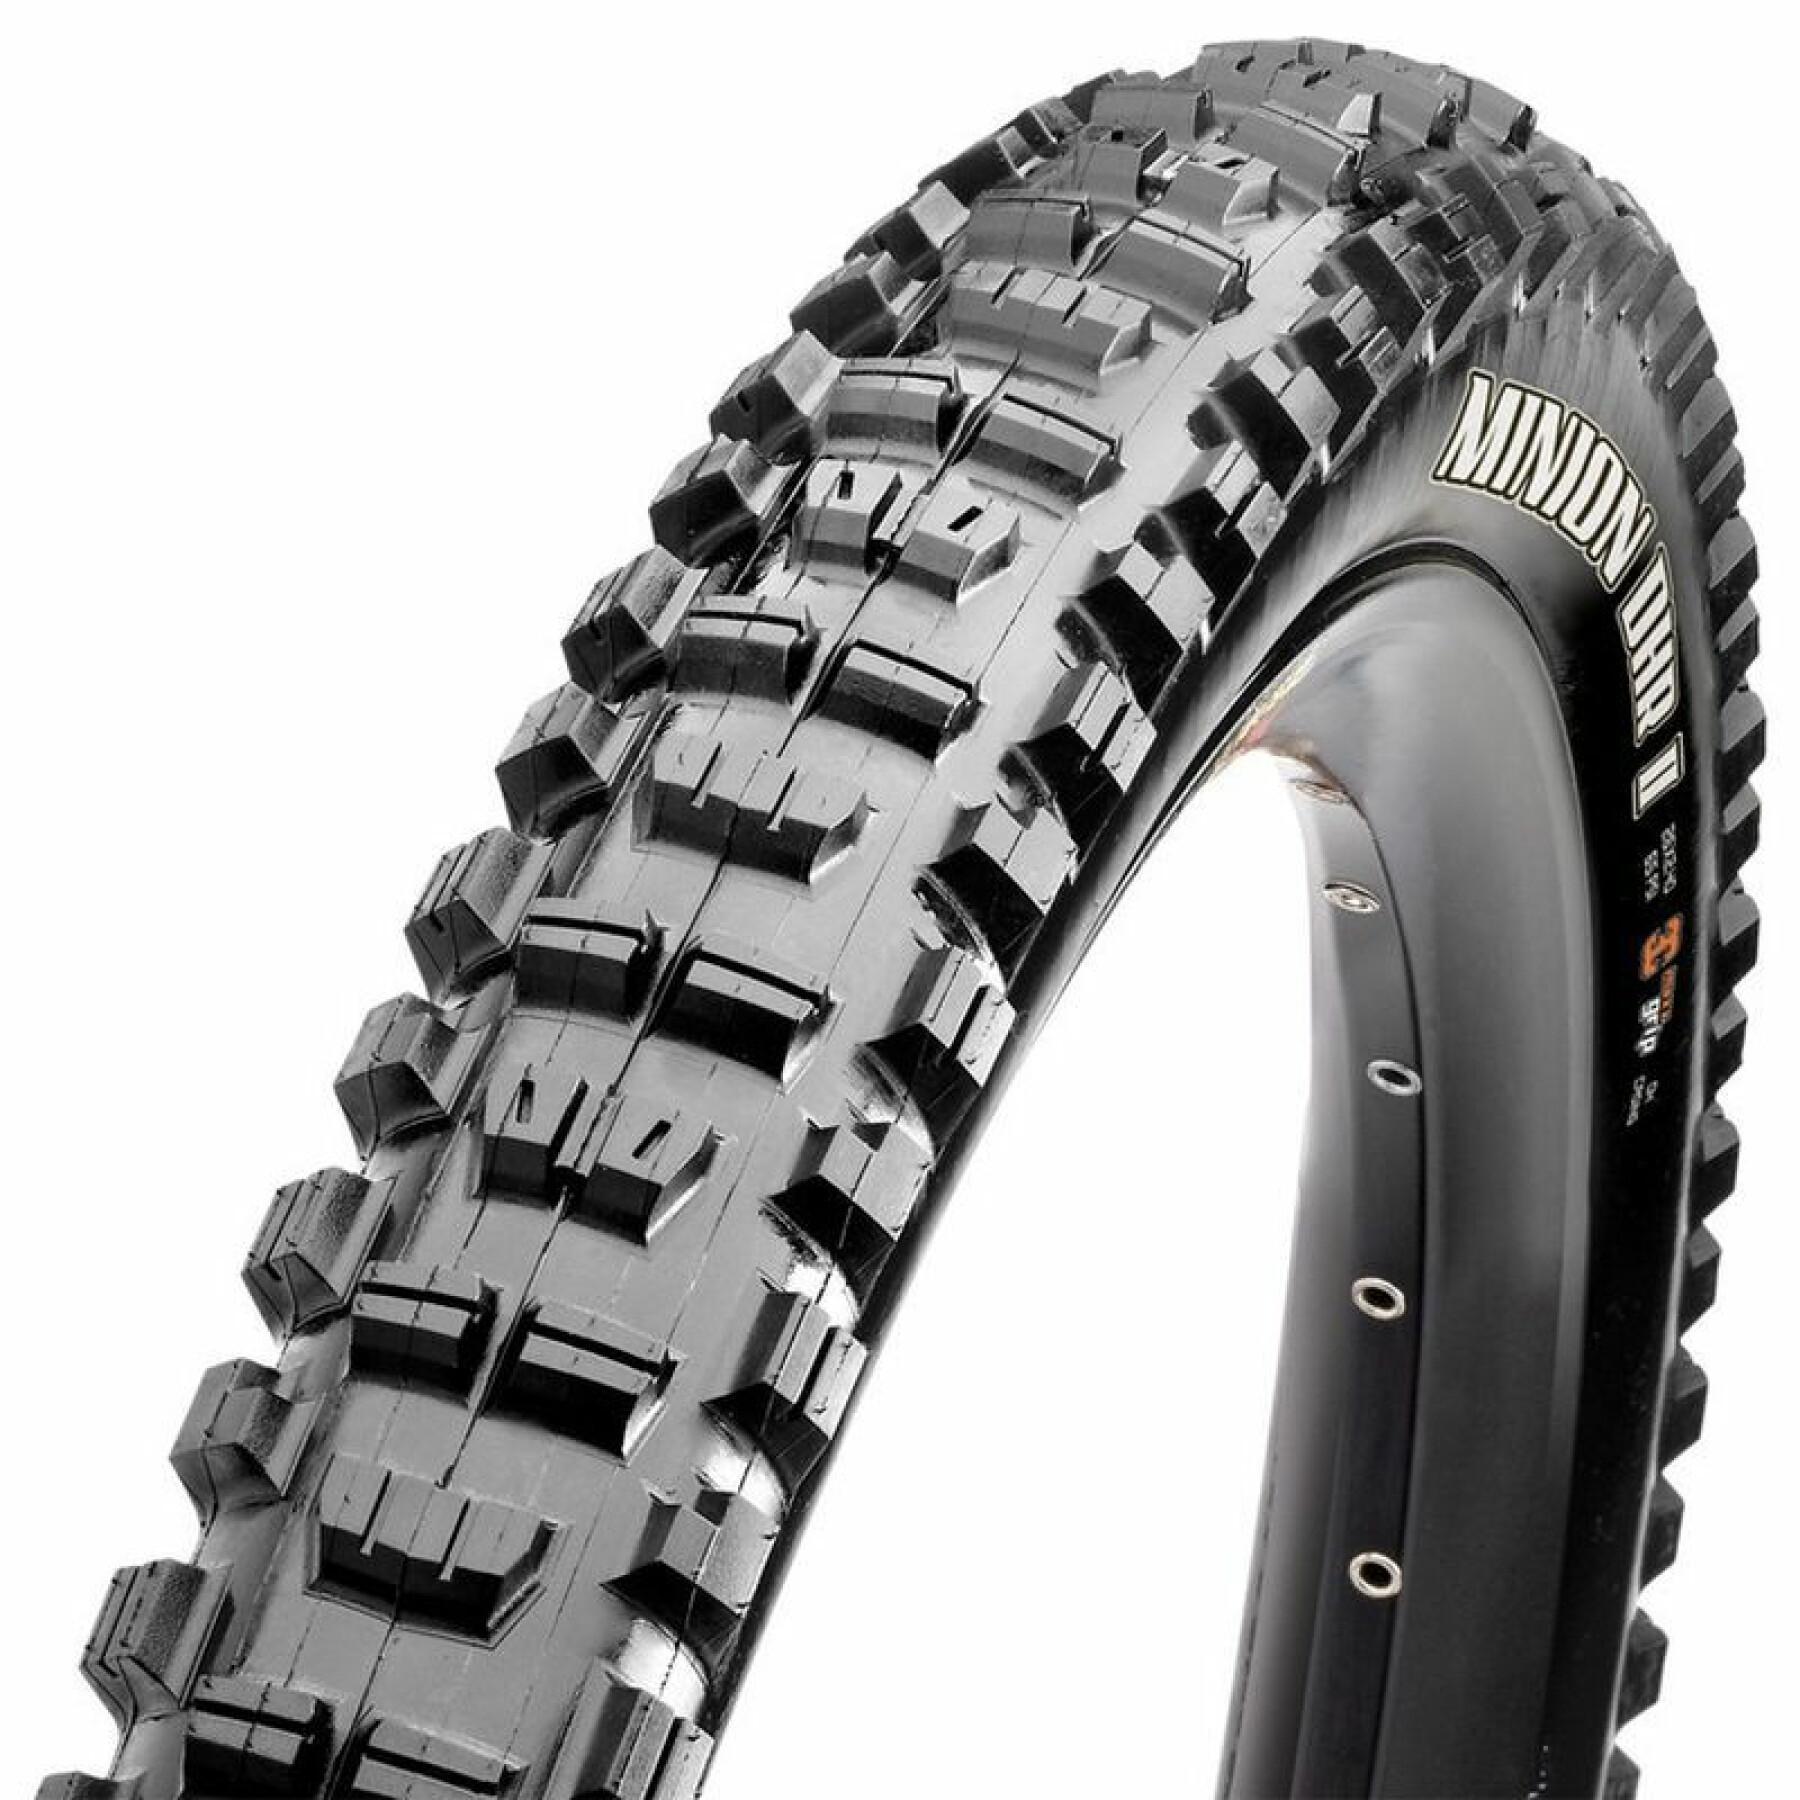 Zachte band Maxxis Minion DHR II Tubeless Ready Exo Dual Compound 27.5x2.40 58-584